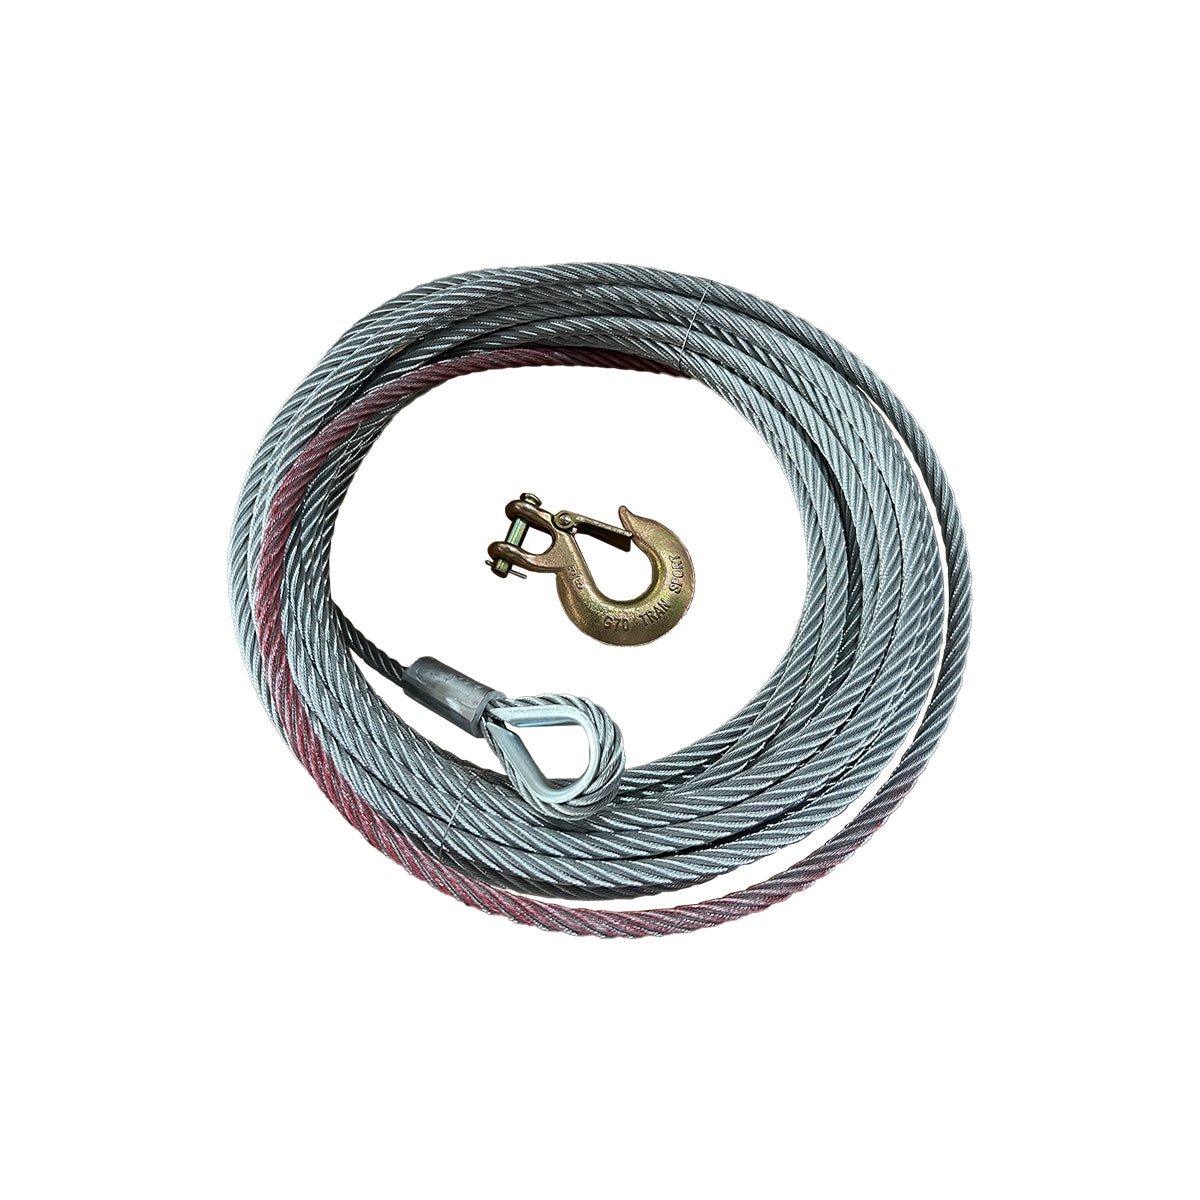 15/32" x 86.9' Steel Cable with Hook